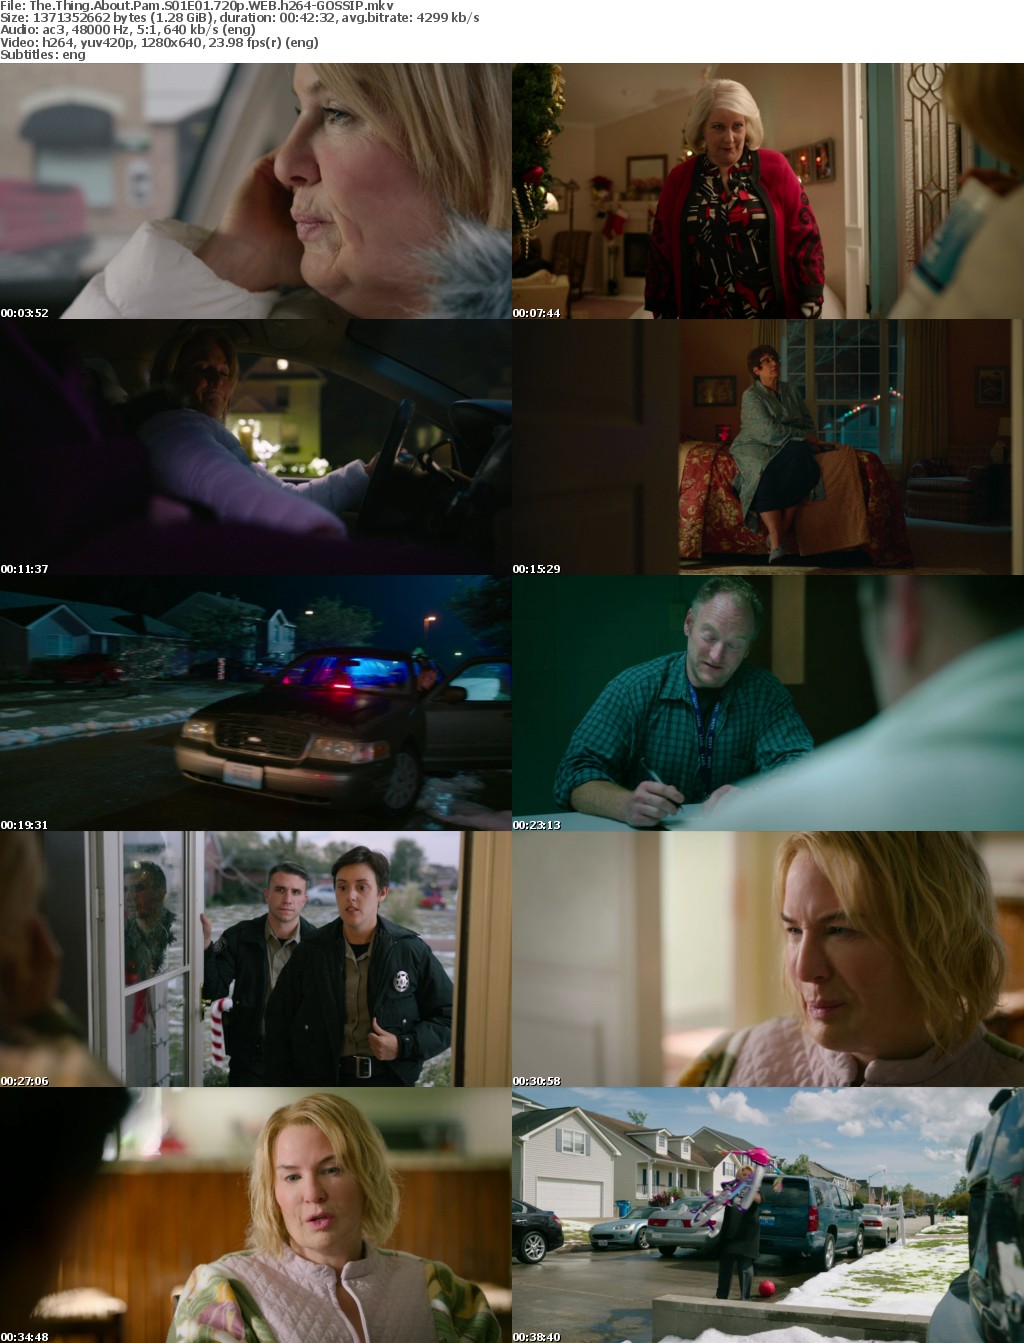 The Thing About Pam S01E01 720p WEB h264-GOSSIP